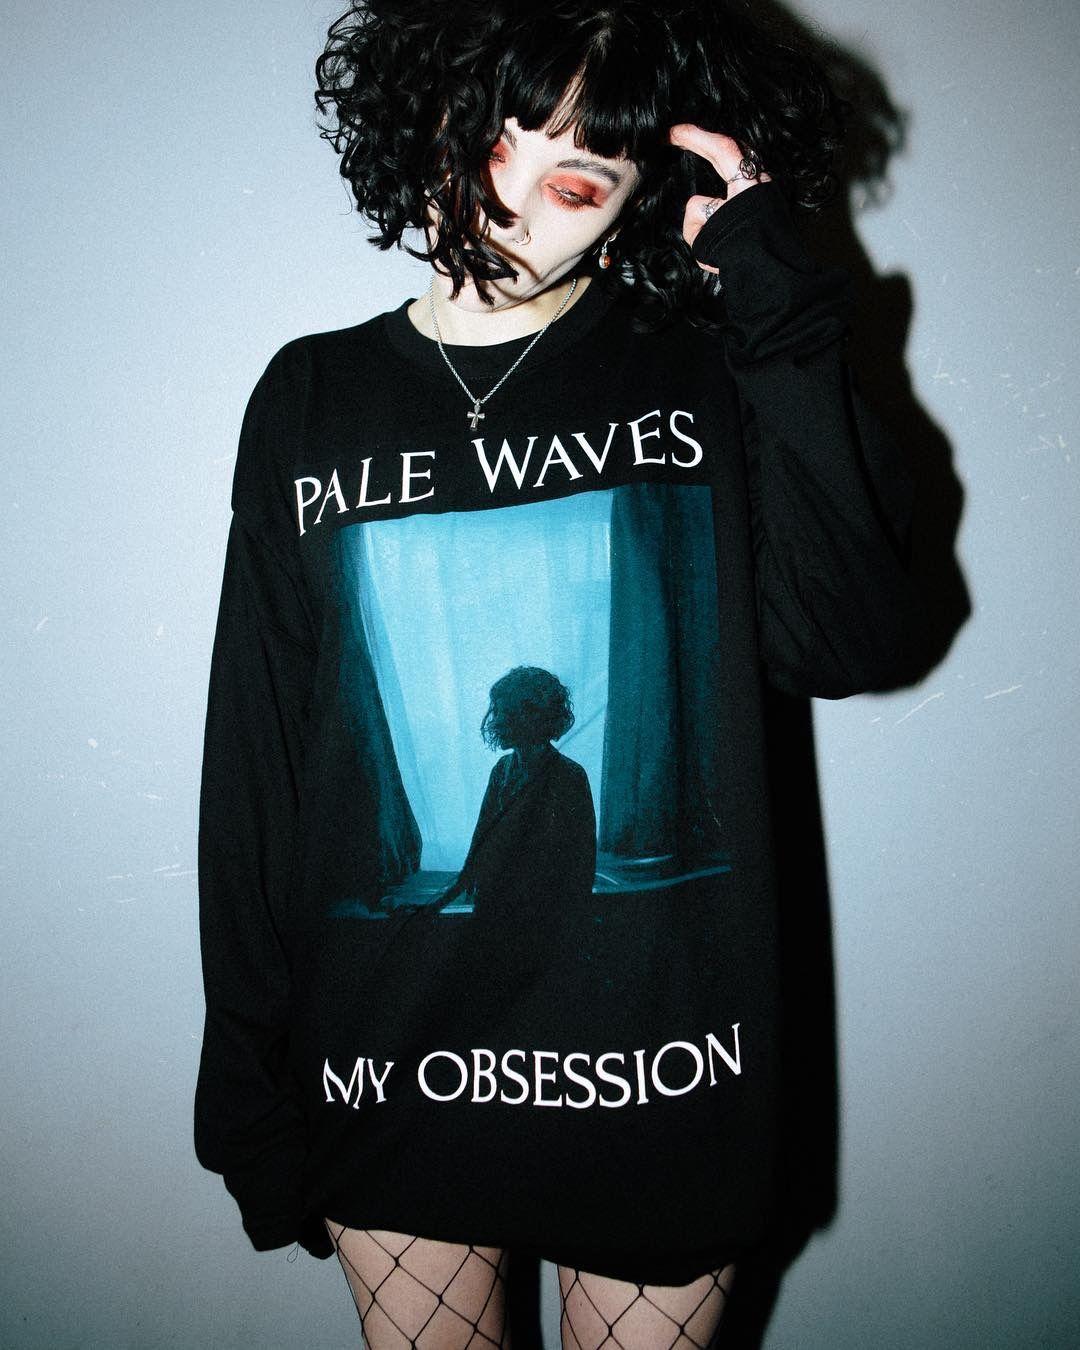 slightly obsessed. Pale waves, Grunge look, Emo outfits